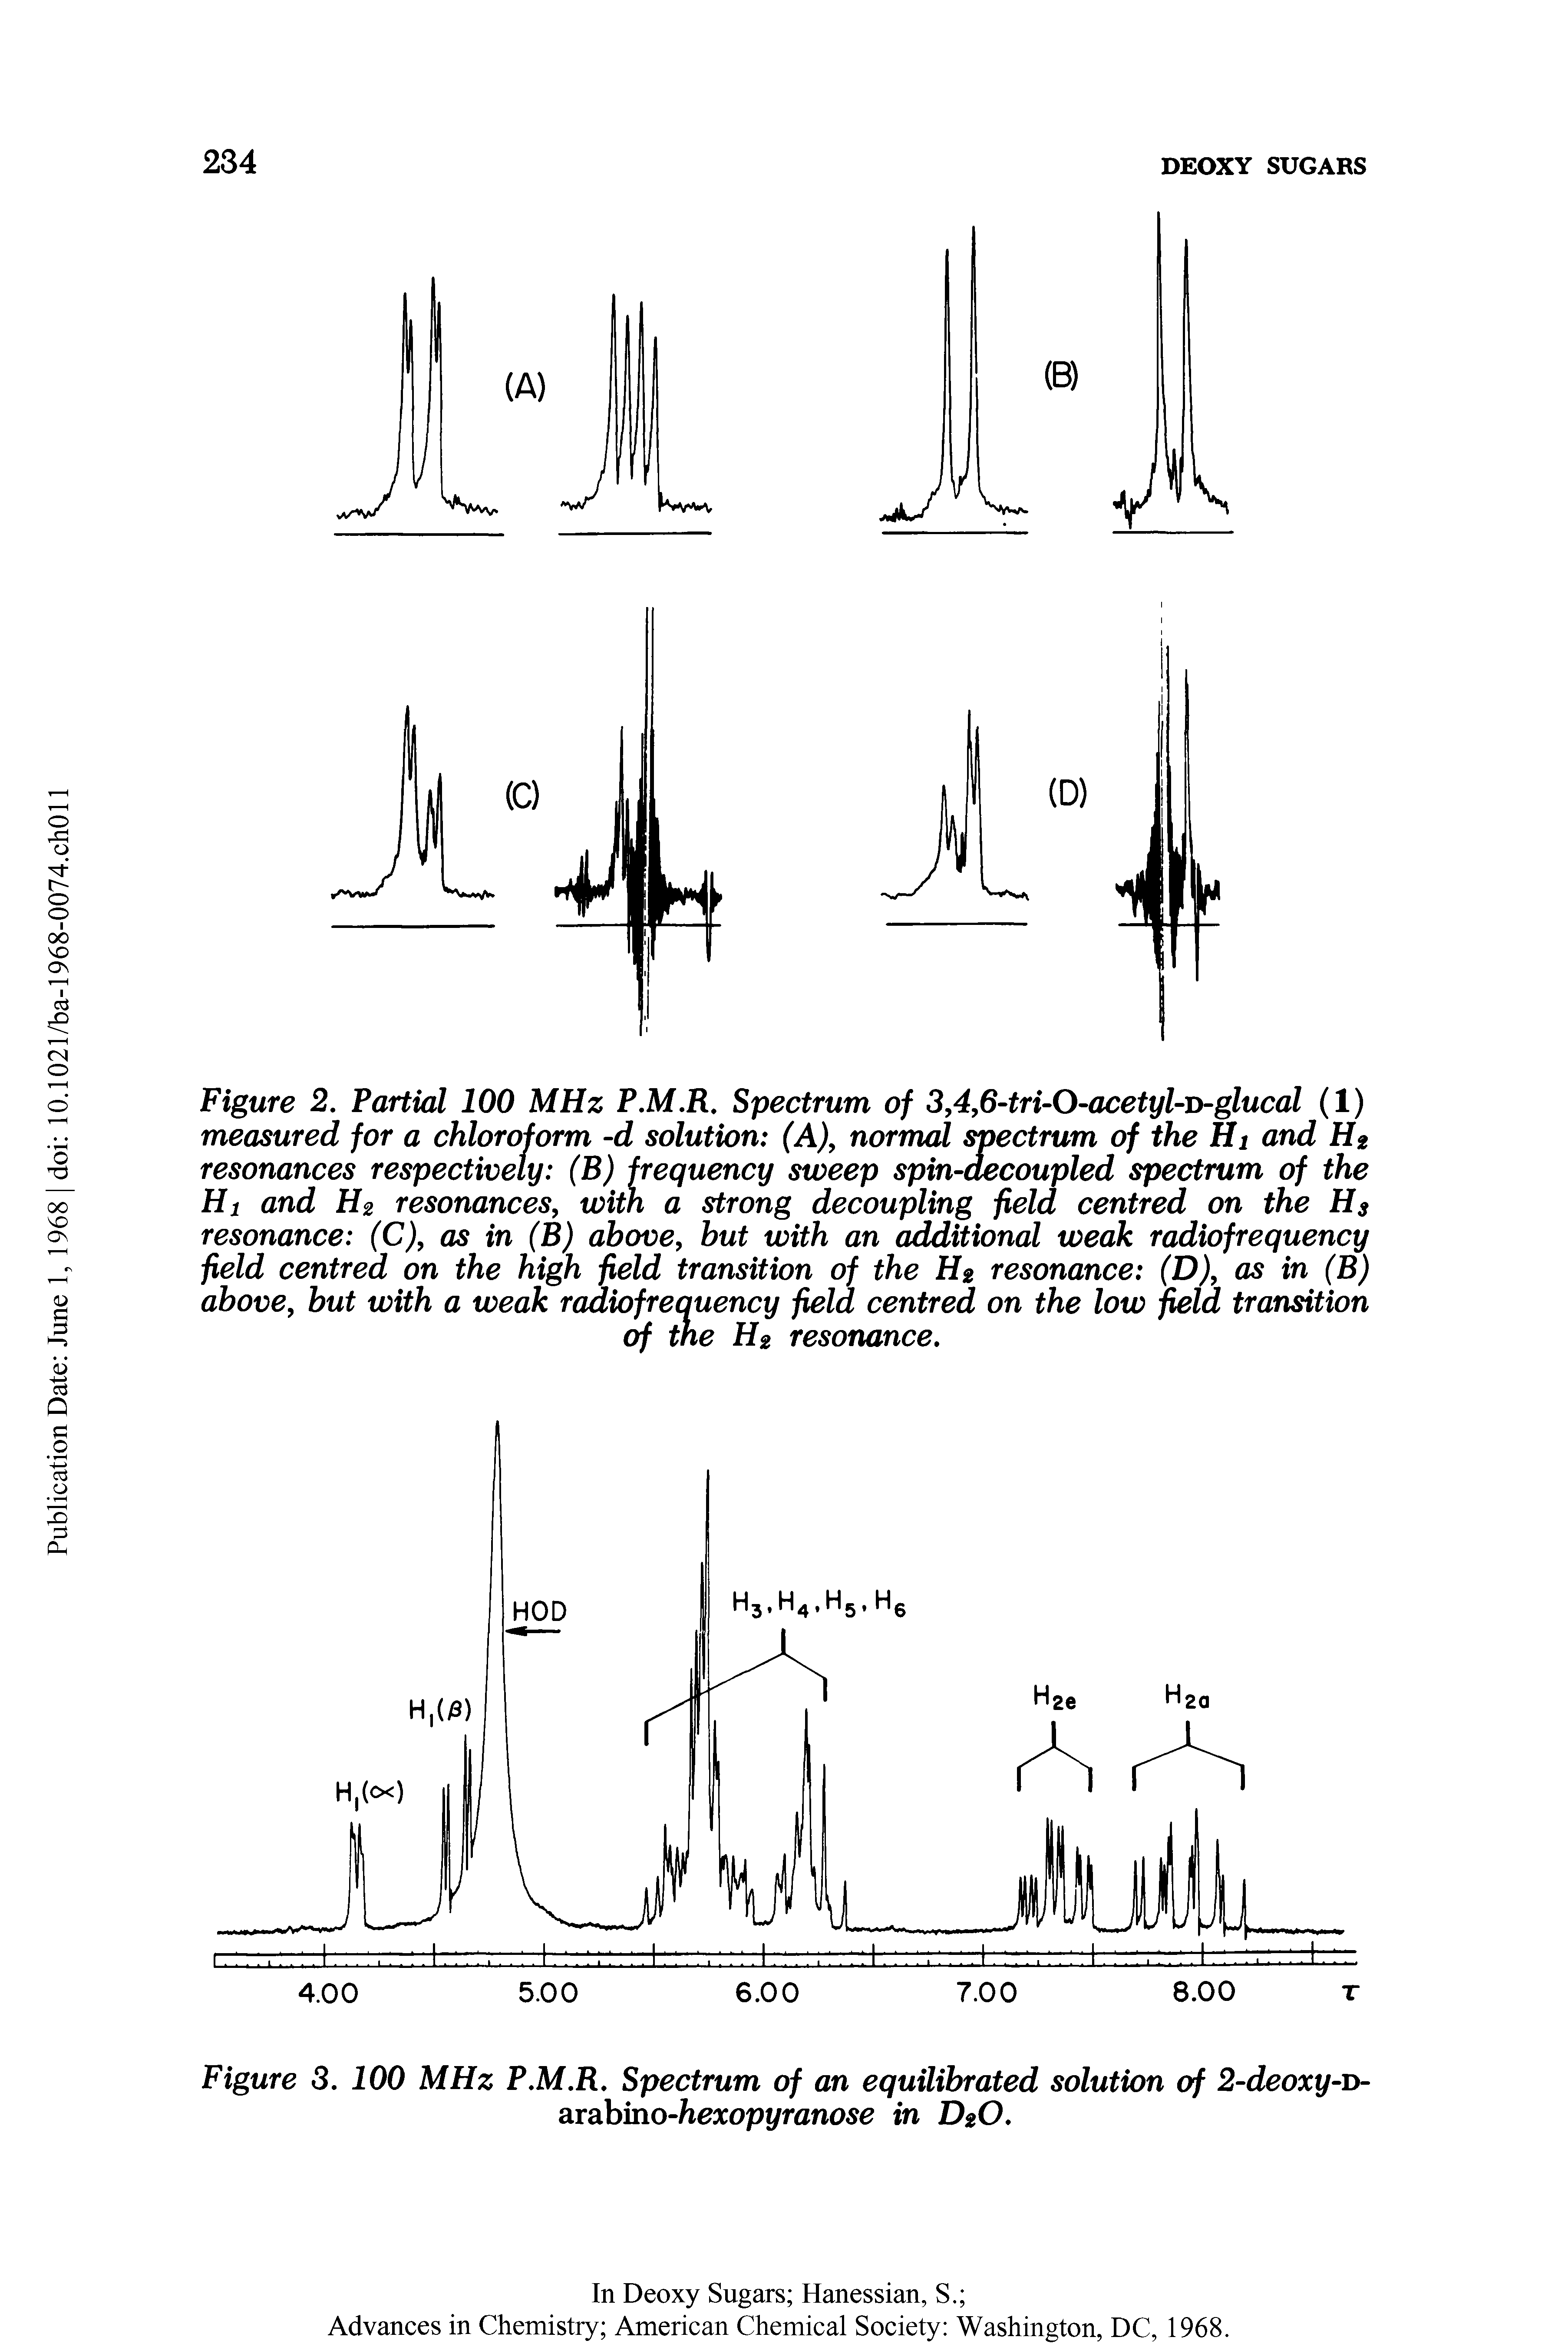 Figure 2. Partial 100 MHz P.M.R. Spectrum of 3,4,6-tri-O-acetyl-v-glucal (1) measured for a chloroform -d solution (A normal spectrum of the Hi and H2 resonances respectively (B) frequency sweep spin-decoupled spectrum of the Hi and H2 resonances, with a strong decoupling field centred on the Hs resonance (C), as in (B) above, but with an additional weak radiofrequency field centred on the high field transition of the H2 resonance (D), as in (B) above, but with a weak radiofreauency field centred on the low field transition...